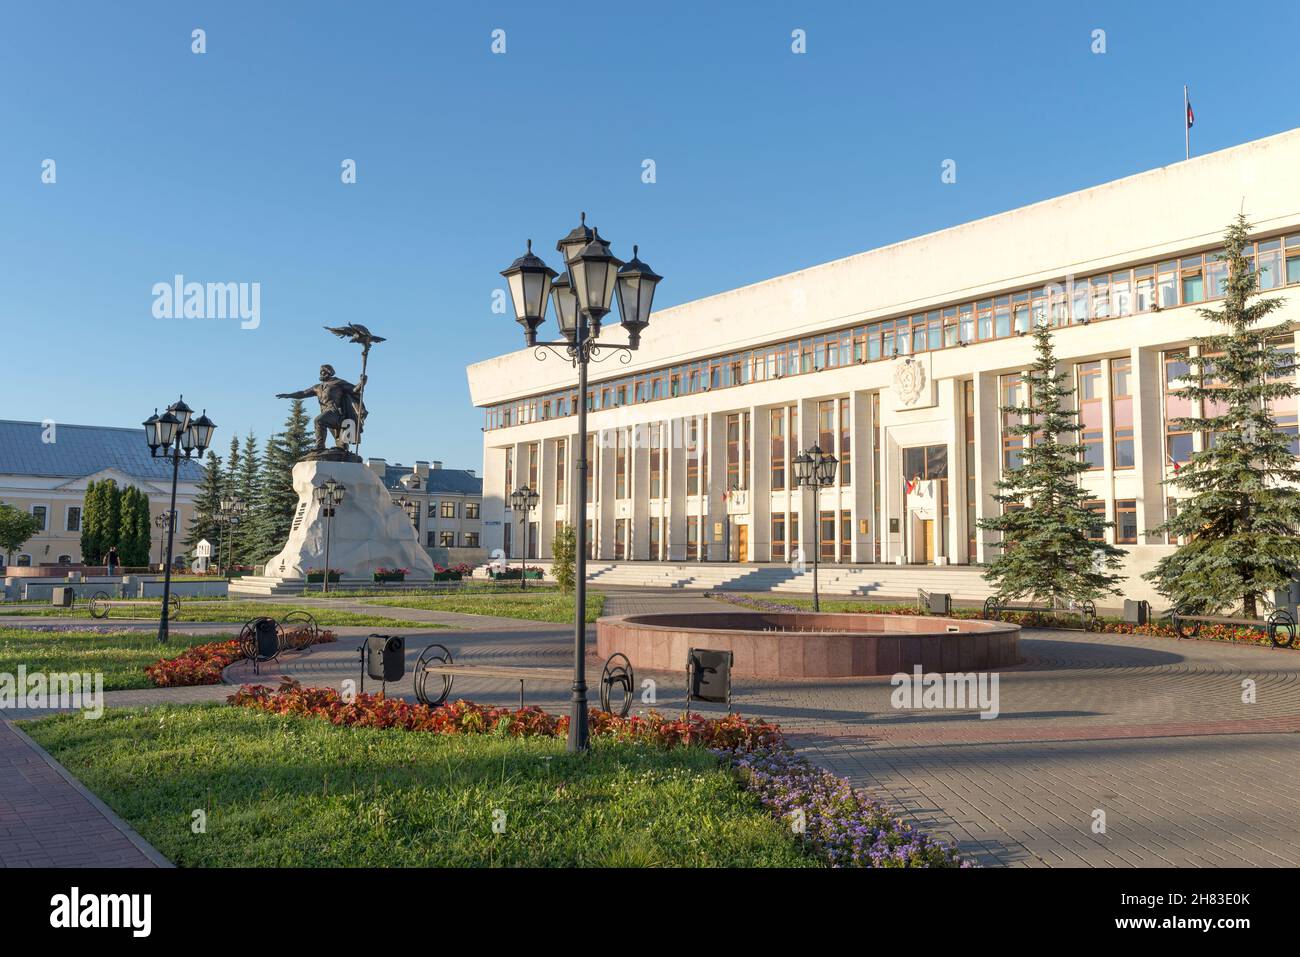 KALUGA, RUSSIA - JULY 07, 2021: Sunny July morning at the regional administration building Stock Photo